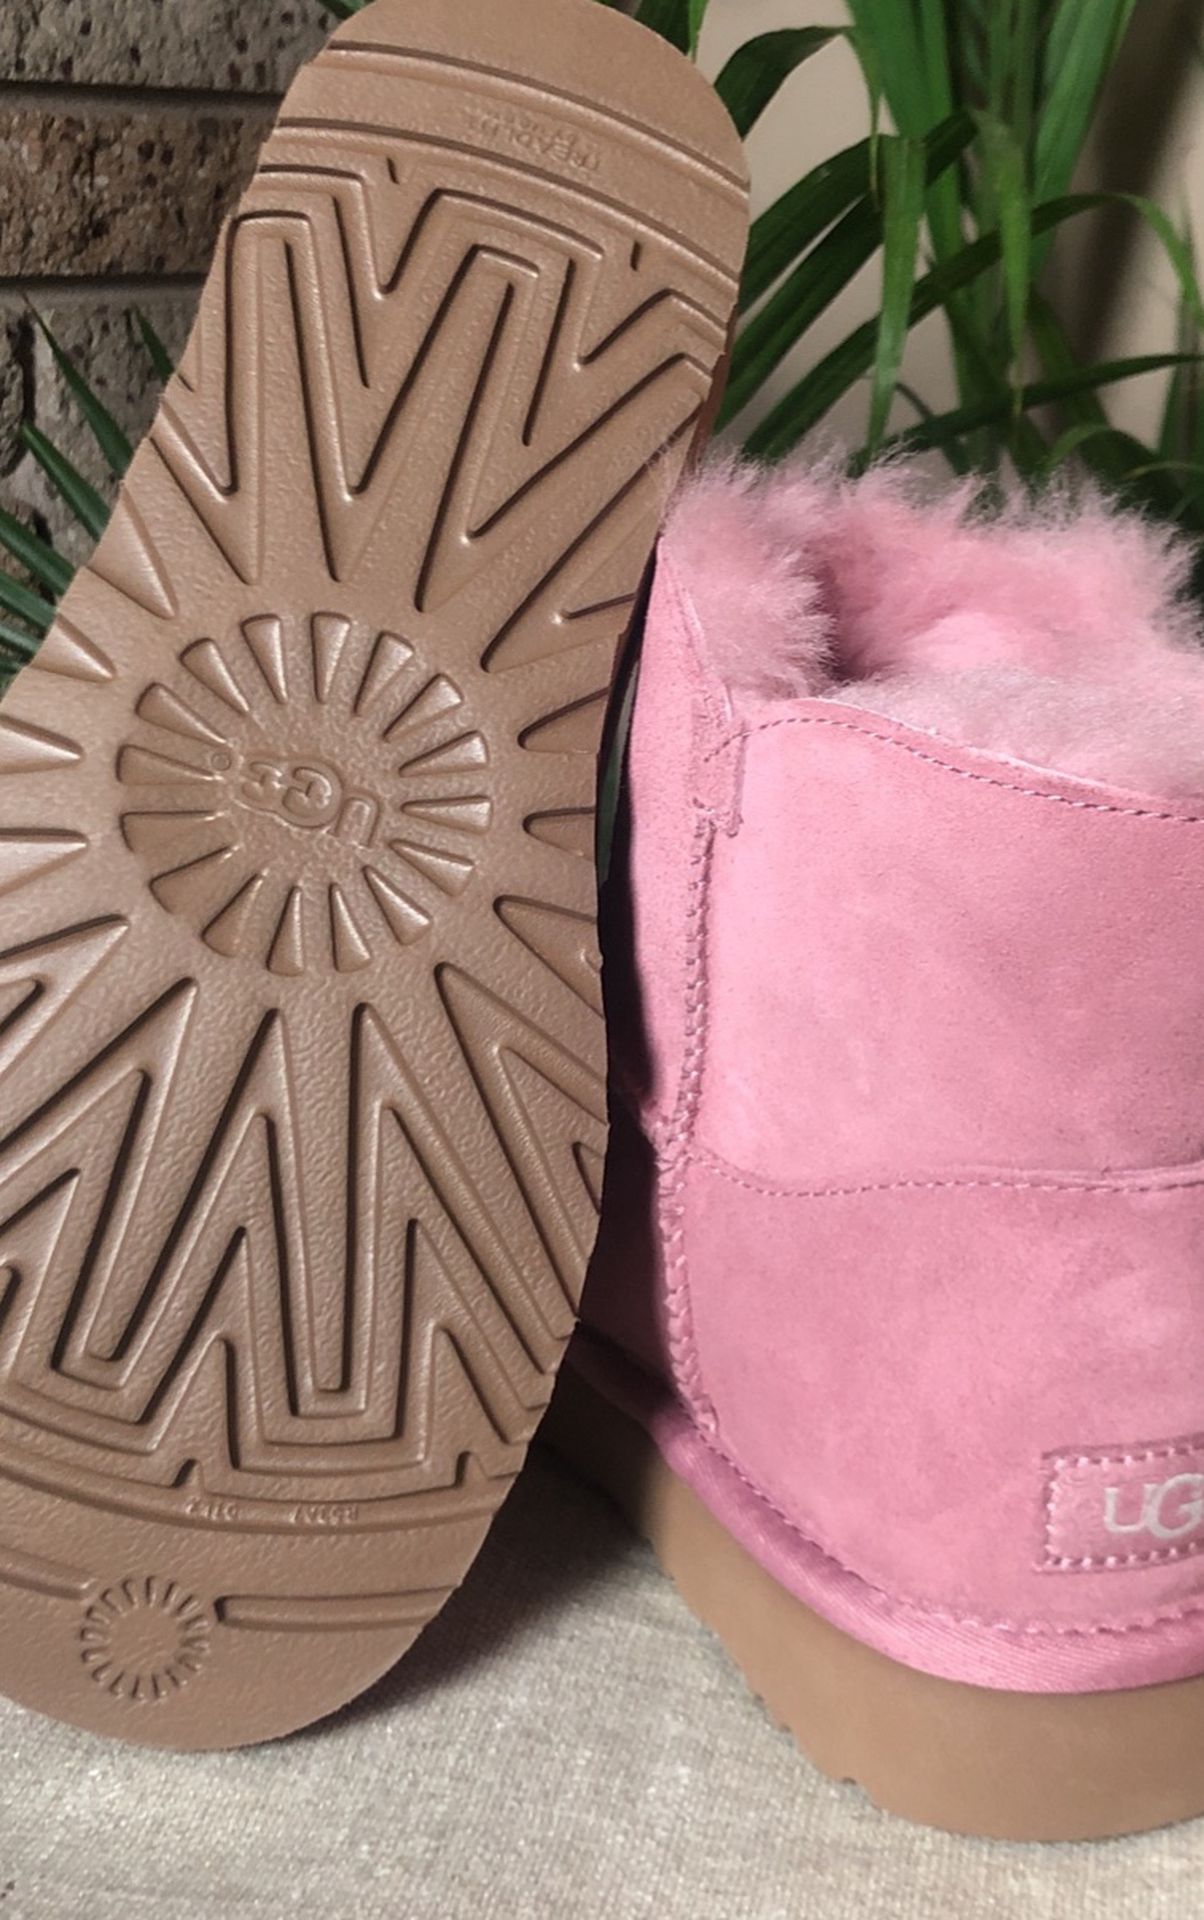 UGGS Boots Pink Size 7